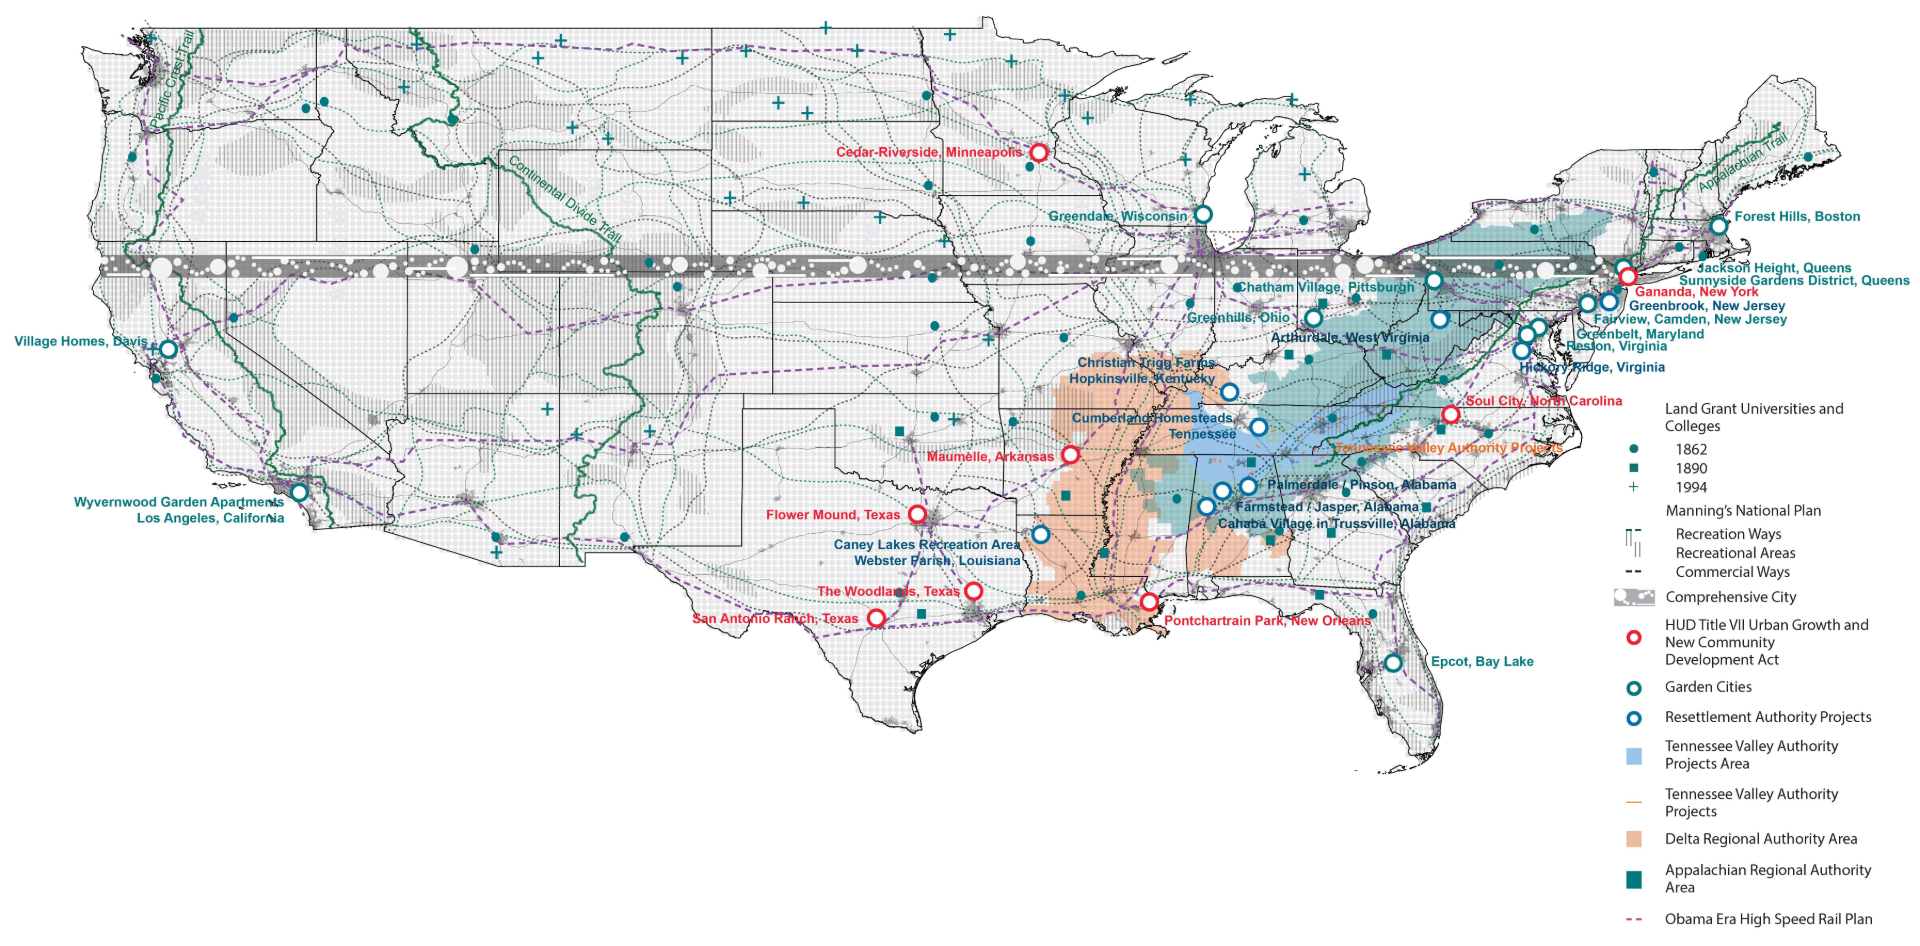 a map of the united states showing different projects and planning initiatives across history